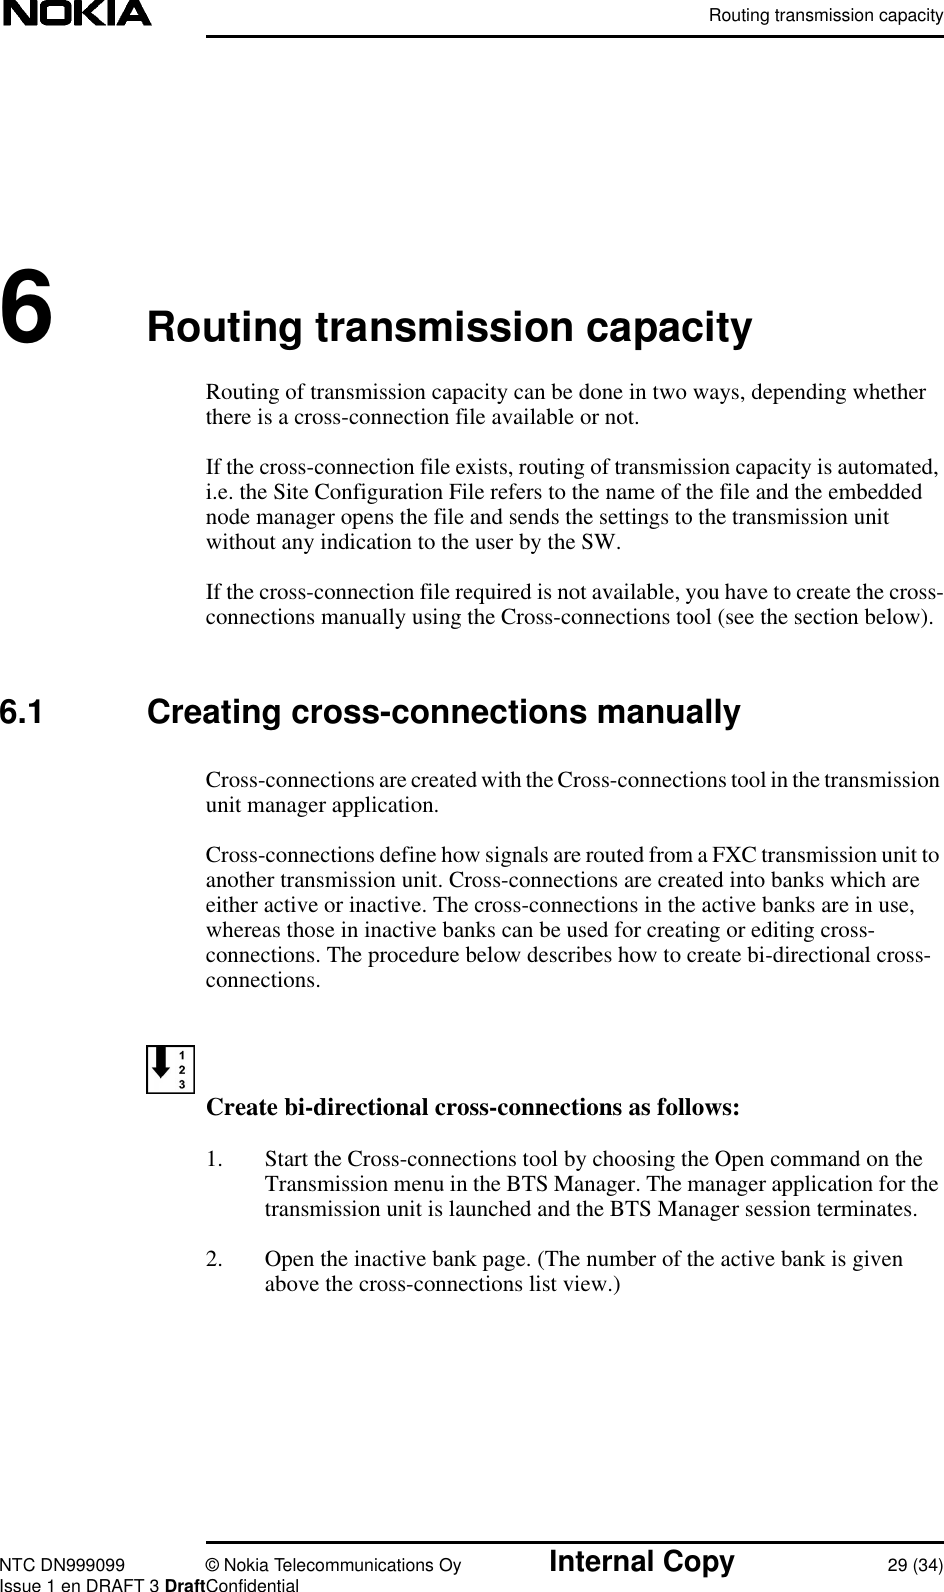 Routing transmission capacityNTC DN999099 © Nokia Telecommunications Oy Internal Copy 29 (34)Issue 1 en DRAFT 3 DraftConfidential6Routing transmission capacityRouting of transmission capacity can be done in two ways, depending whetherthere is a cross-connection file available or not.If the cross-connection file exists, routing of transmission capacity is automated,i.e. the Site Configuration File refers to the name of the file and the embeddednode manager opens the file and sends the settings to the transmission unitwithout any indication to the user by the SW.If the cross-connection file required is not available, you have to create the cross-connections manually using the Cross-connections tool (see the section below).6.1 Creating cross-connections manuallyCross-connections are created with the Cross-connections tool in the transmissionunit manager application.Cross-connections define how signals are routed from a FXC transmission unit toanother transmission unit. Cross-connections are created into banks which areeither active or inactive. The cross-connections in the active banks are in use,whereas those in inactive banks can be used for creating or editing cross-connections. The procedure below describes how to create bi-directional cross-connections.Create bi-directional cross-connections as follows:1. Start the Cross-connections tool by choosing the Open command on theTransmission menu in the BTS Manager. The manager application for thetransmission unit is launched and the BTS Manager session terminates.2. Open the inactive bank page. (The number of the active bank is givenabove the cross-connections list view.)